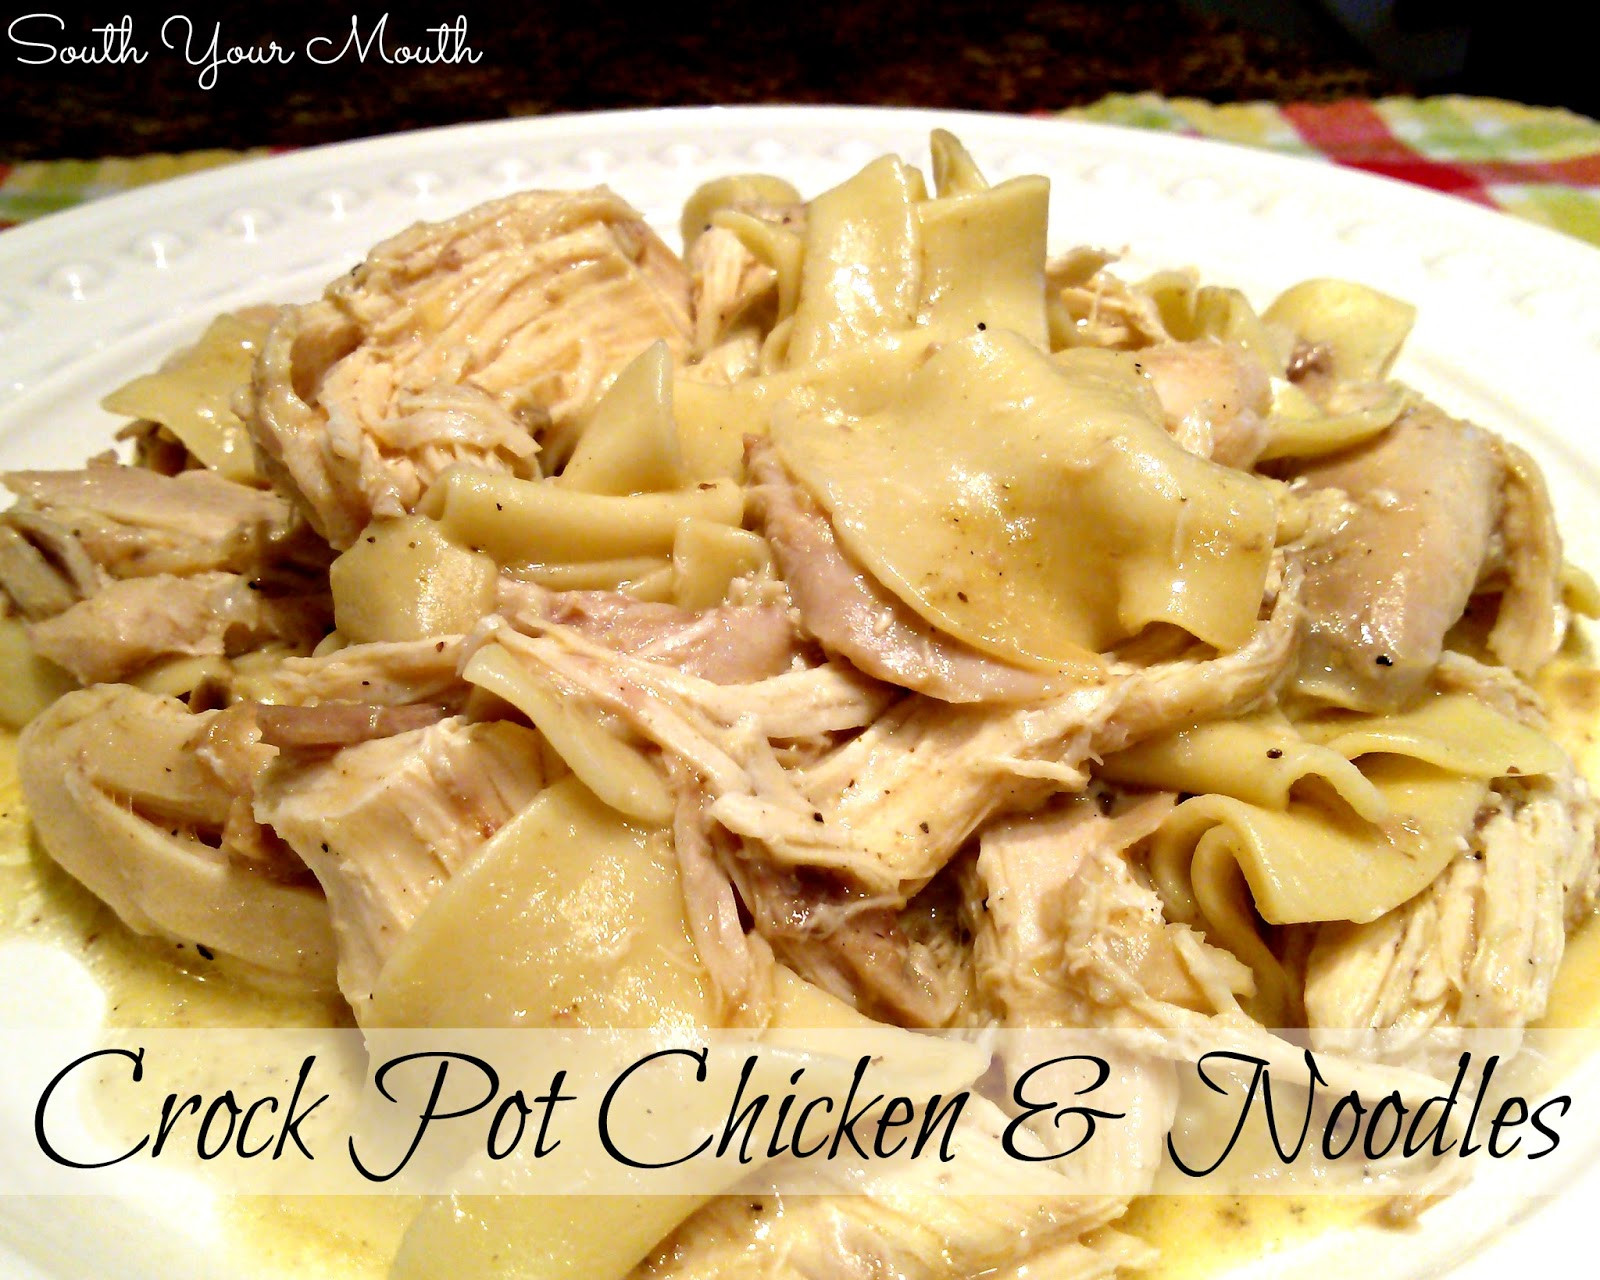 Chicken And Noodles Crockpot
 South Your Mouth Crock Pot Chicken and Noodles